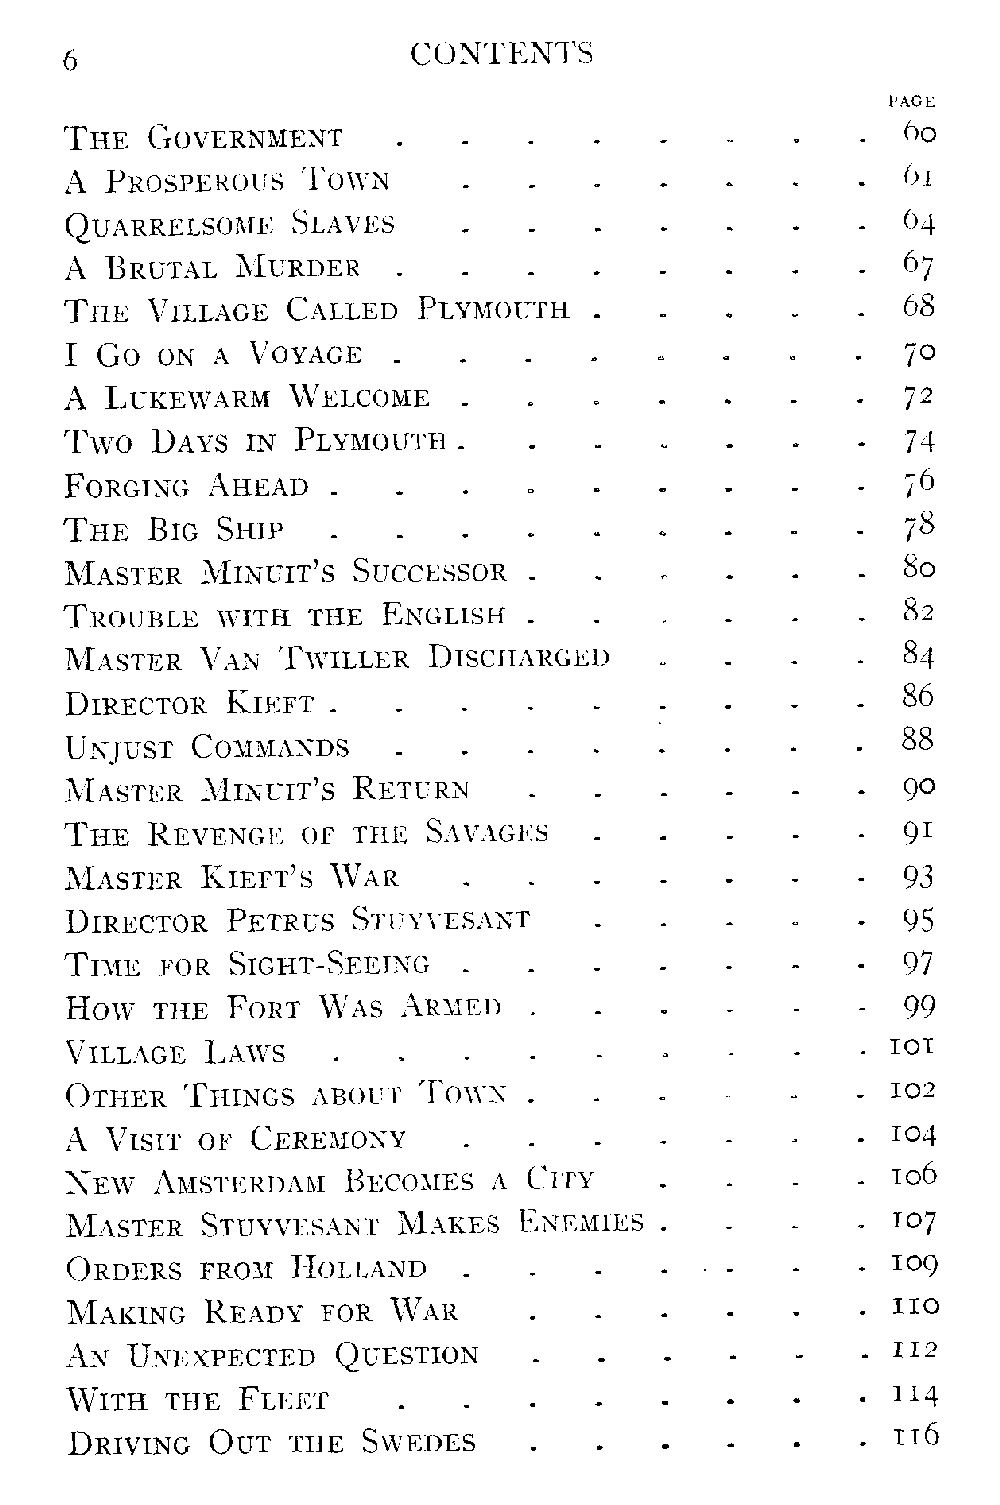 [Contents Page 2 of 5] from Peter of New Amsterdam by James Otis